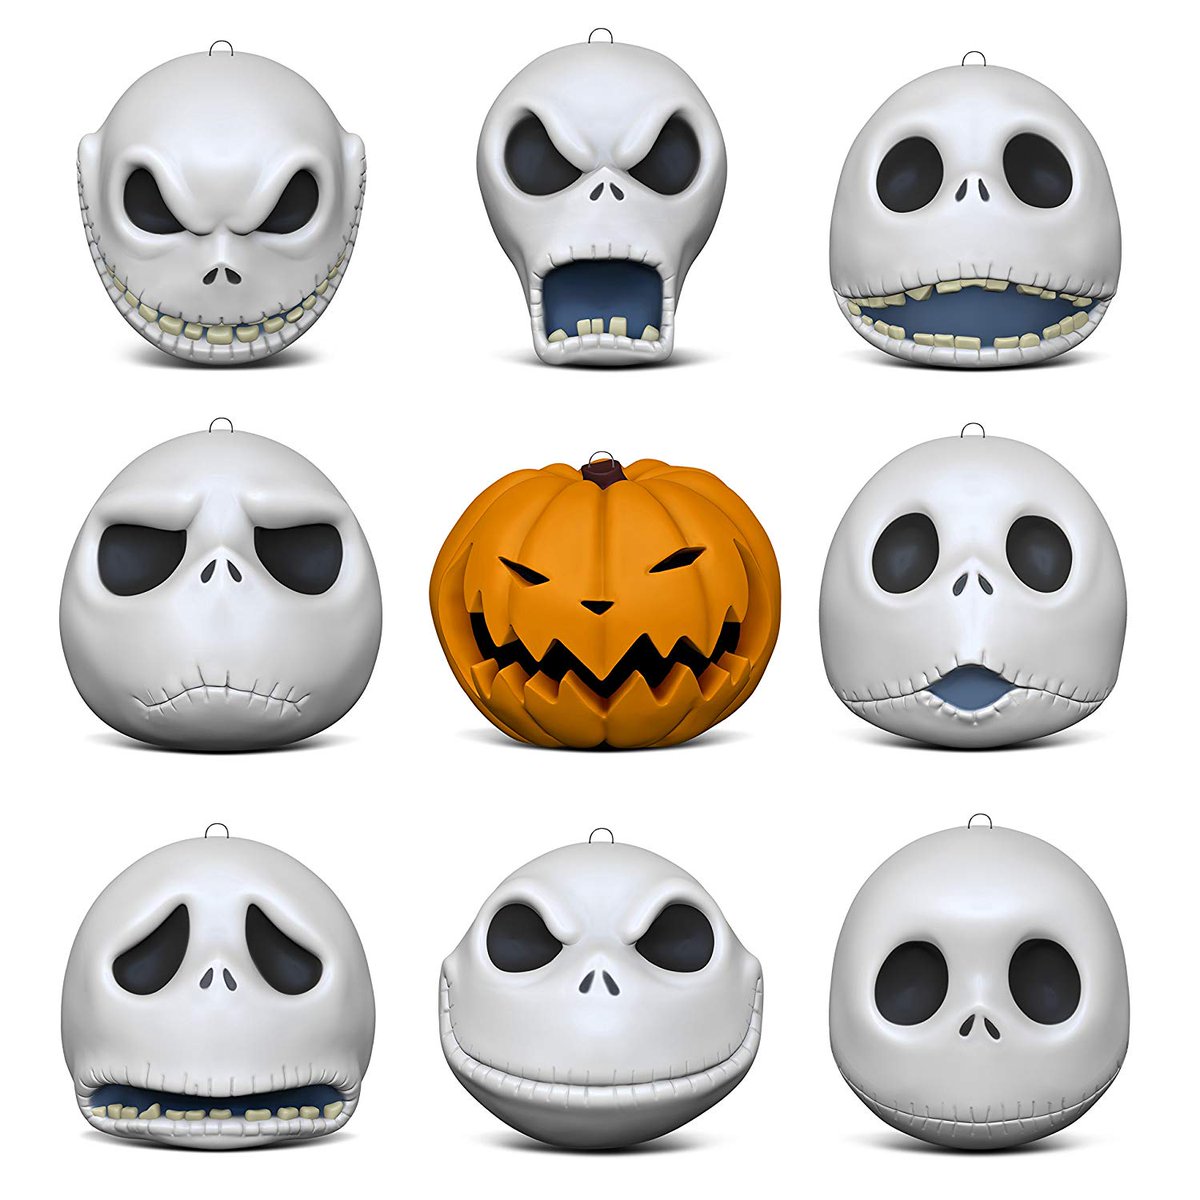 Super Punch: The Many Faces of Jack Skellington 25th Anniversary ornament set